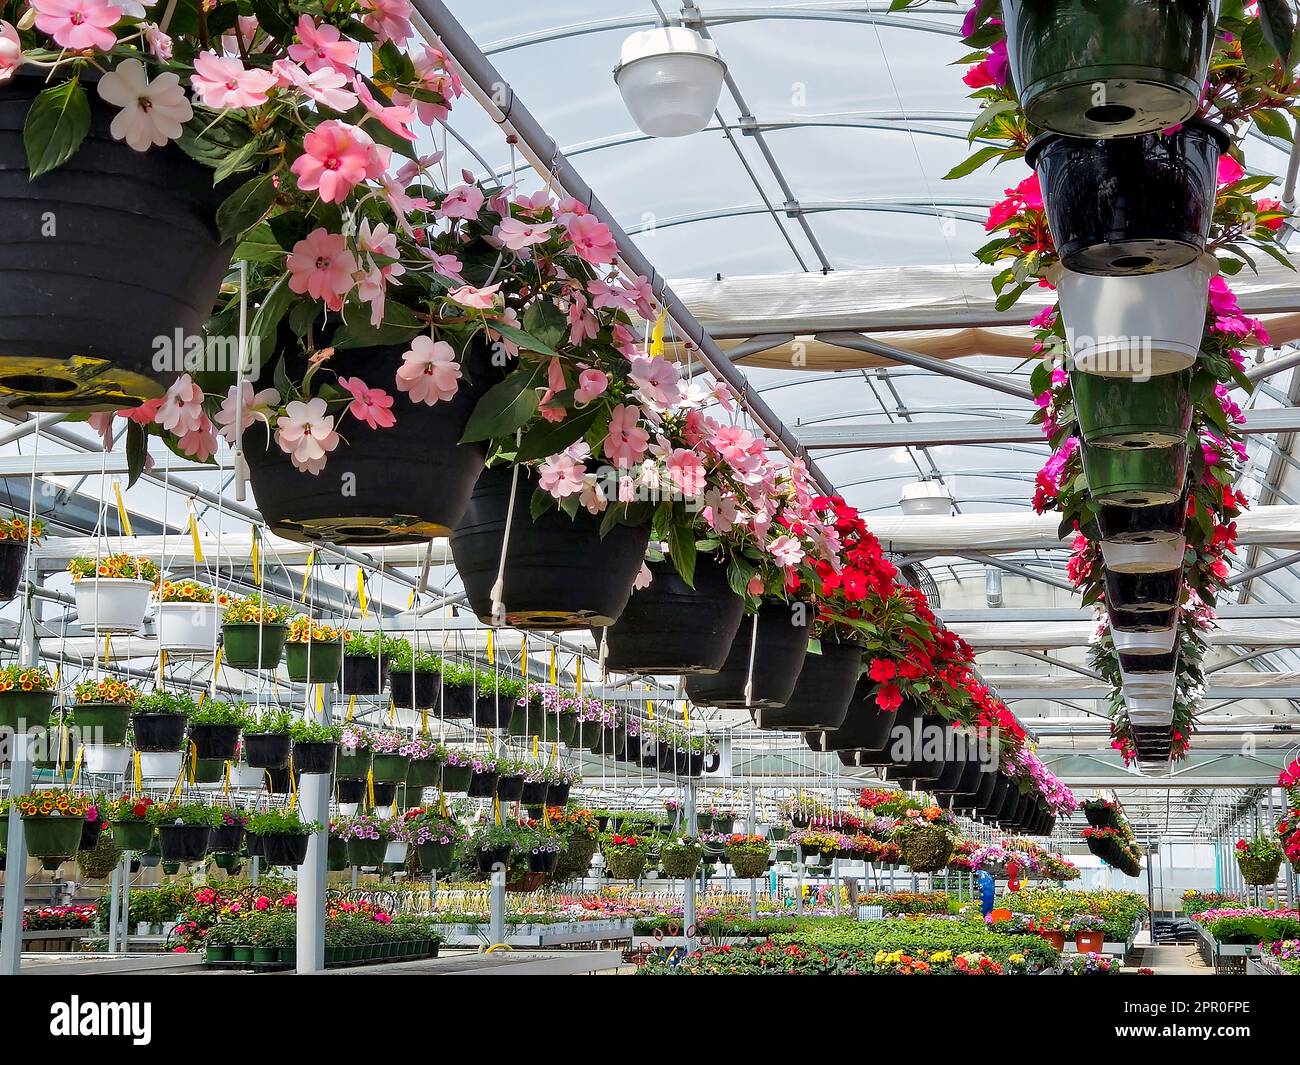 Hanging impatiens flower baskets in a greenhouse Stock Photo